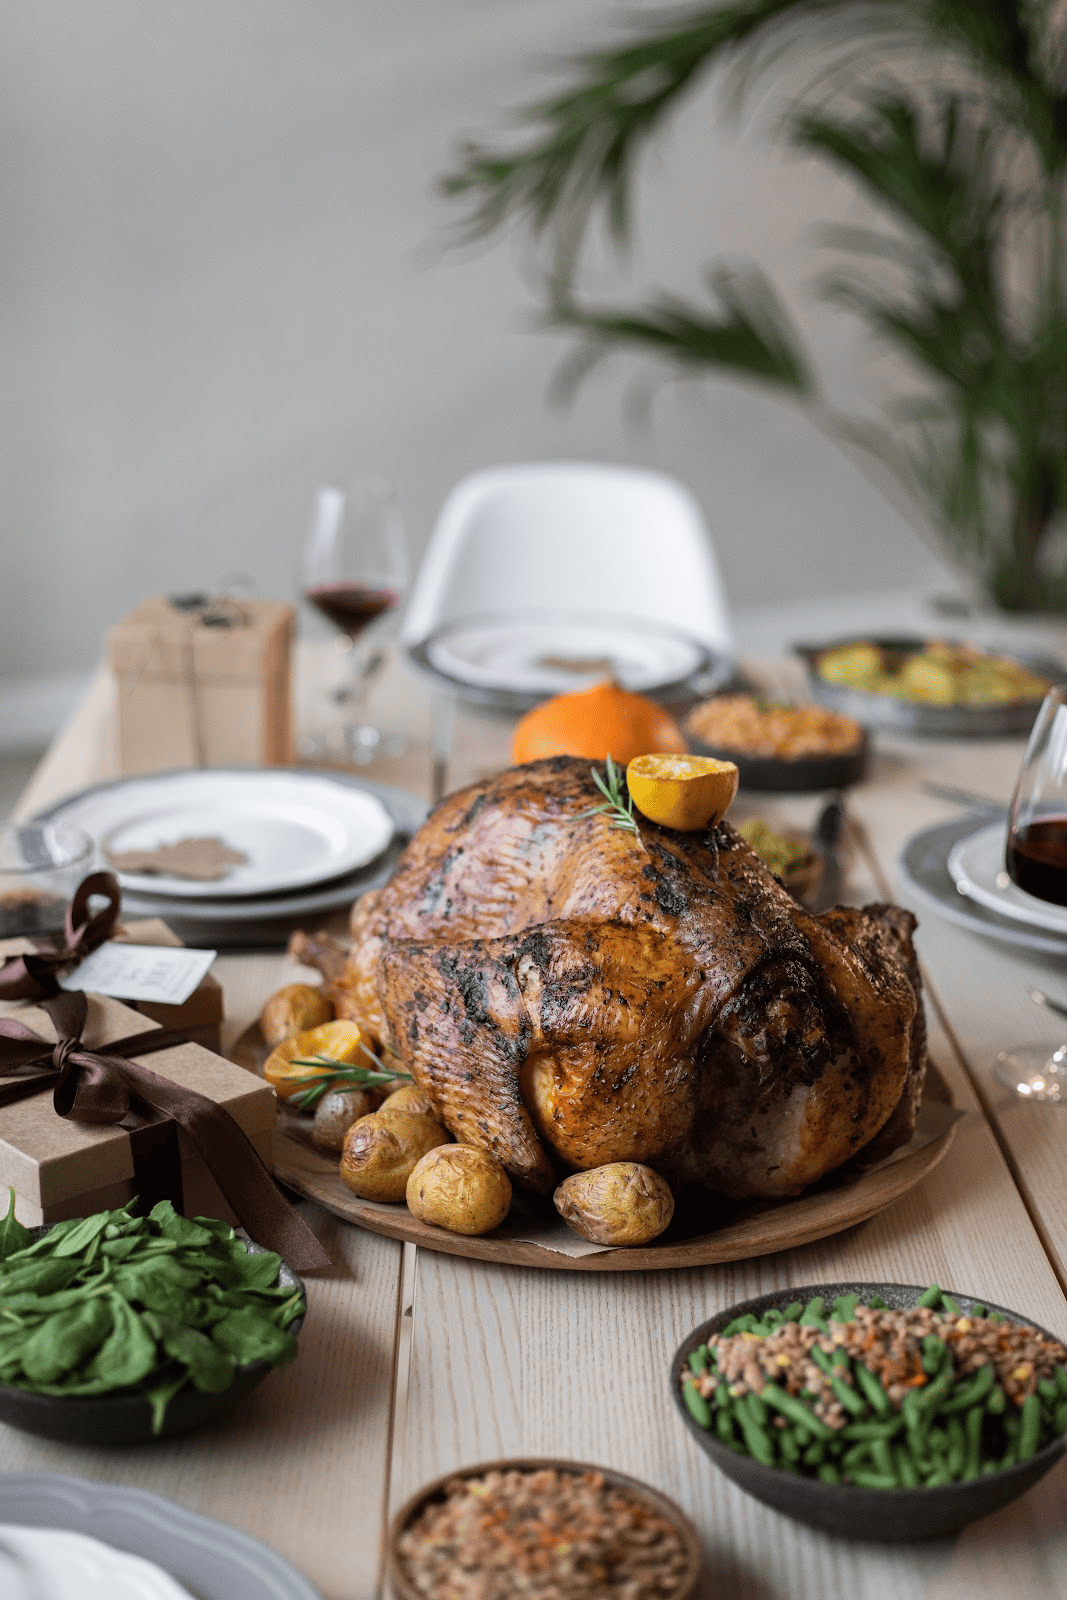 In many countries around the world, it's traditional to have some form of ‘roast’ at least once a week - often on a Sunday. It’s a great dish that’s sure to bring everyone to the table!